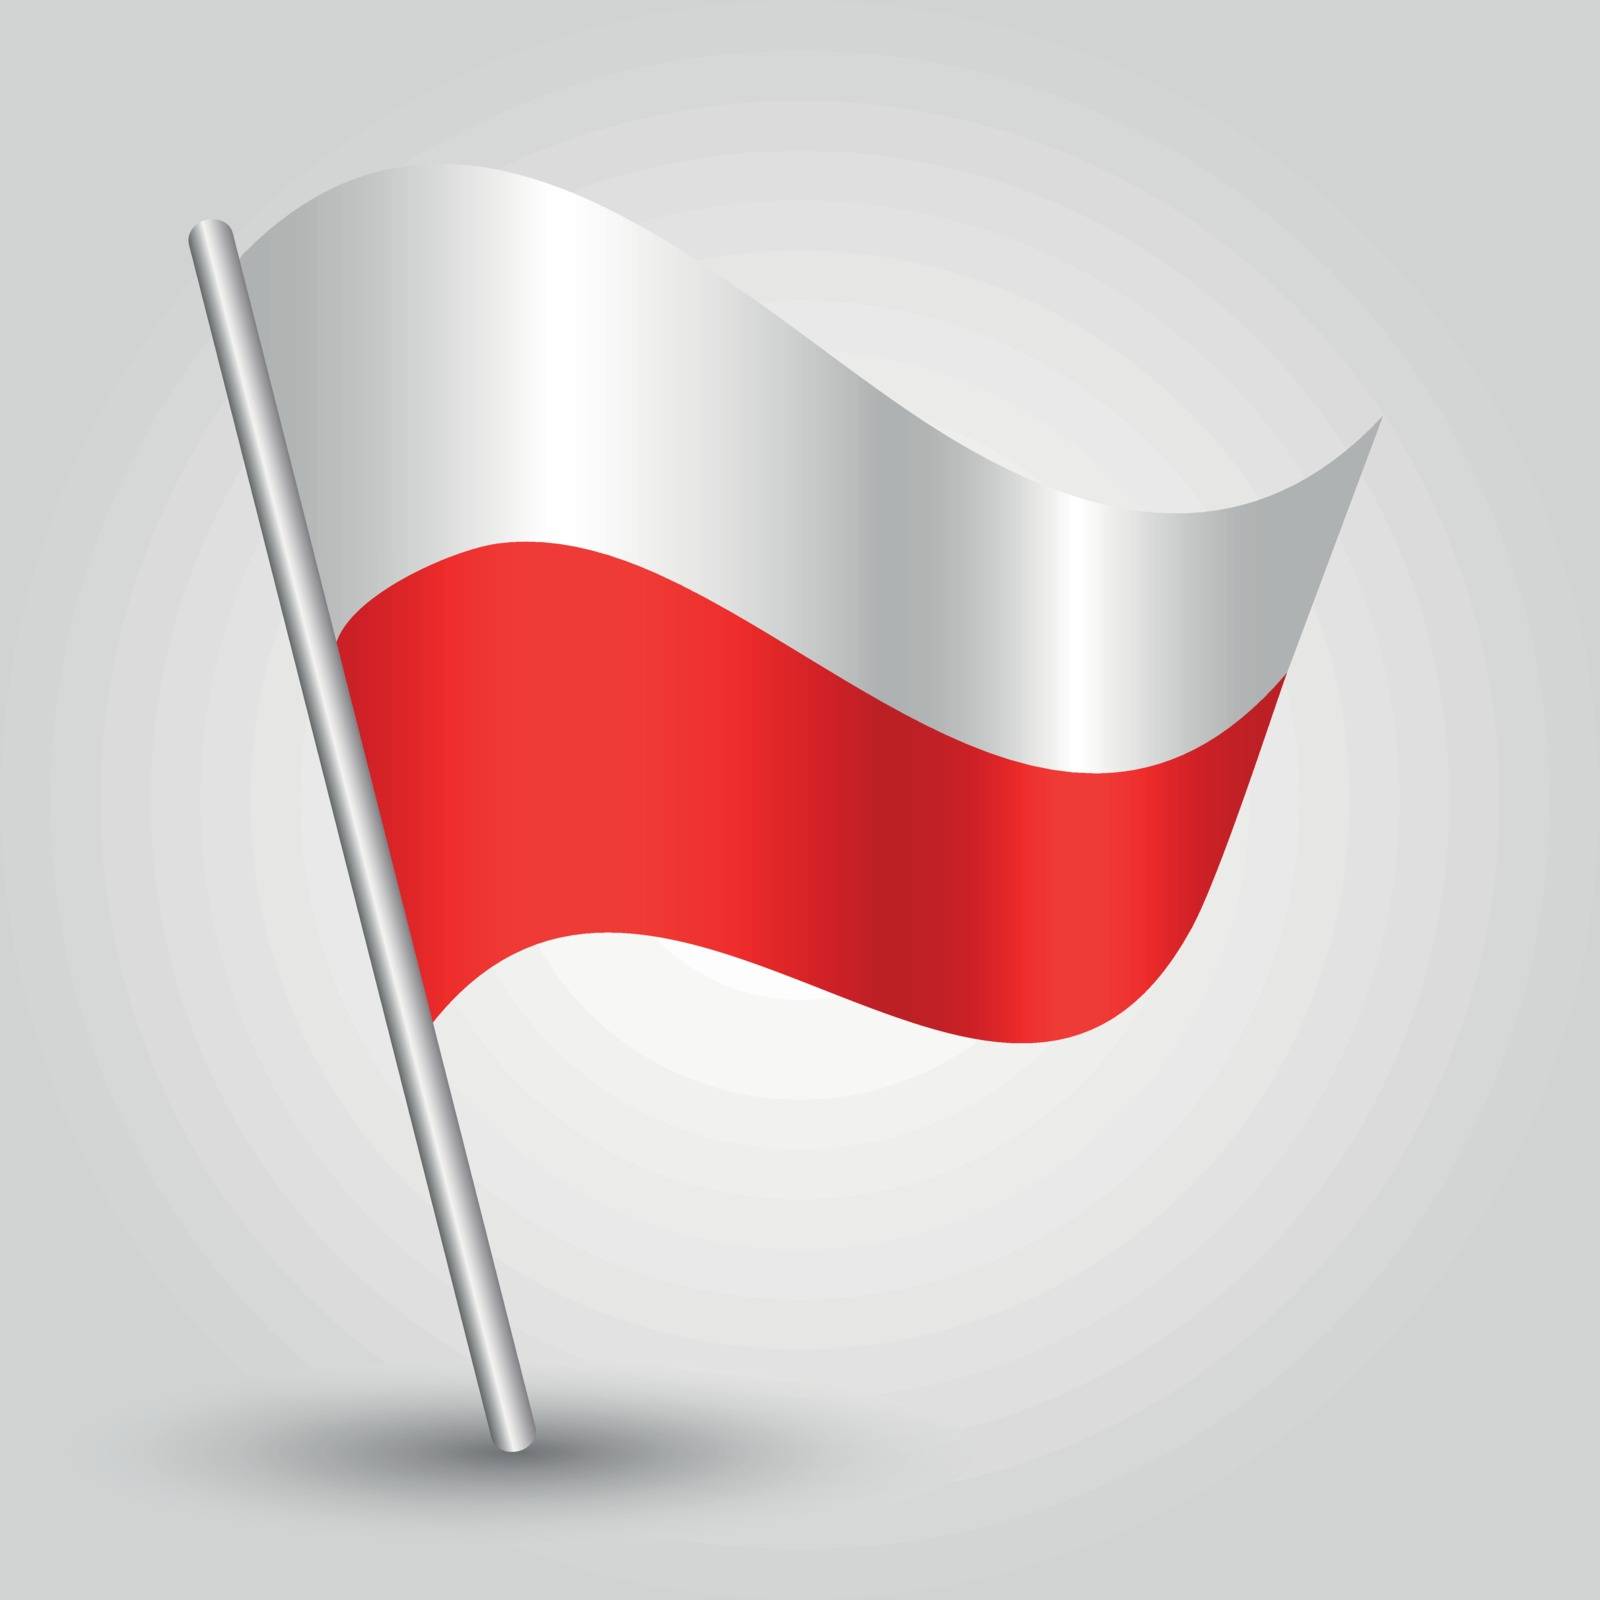 vector 3d waving polish flag on pole - national symbol of poland with inclined metal stick